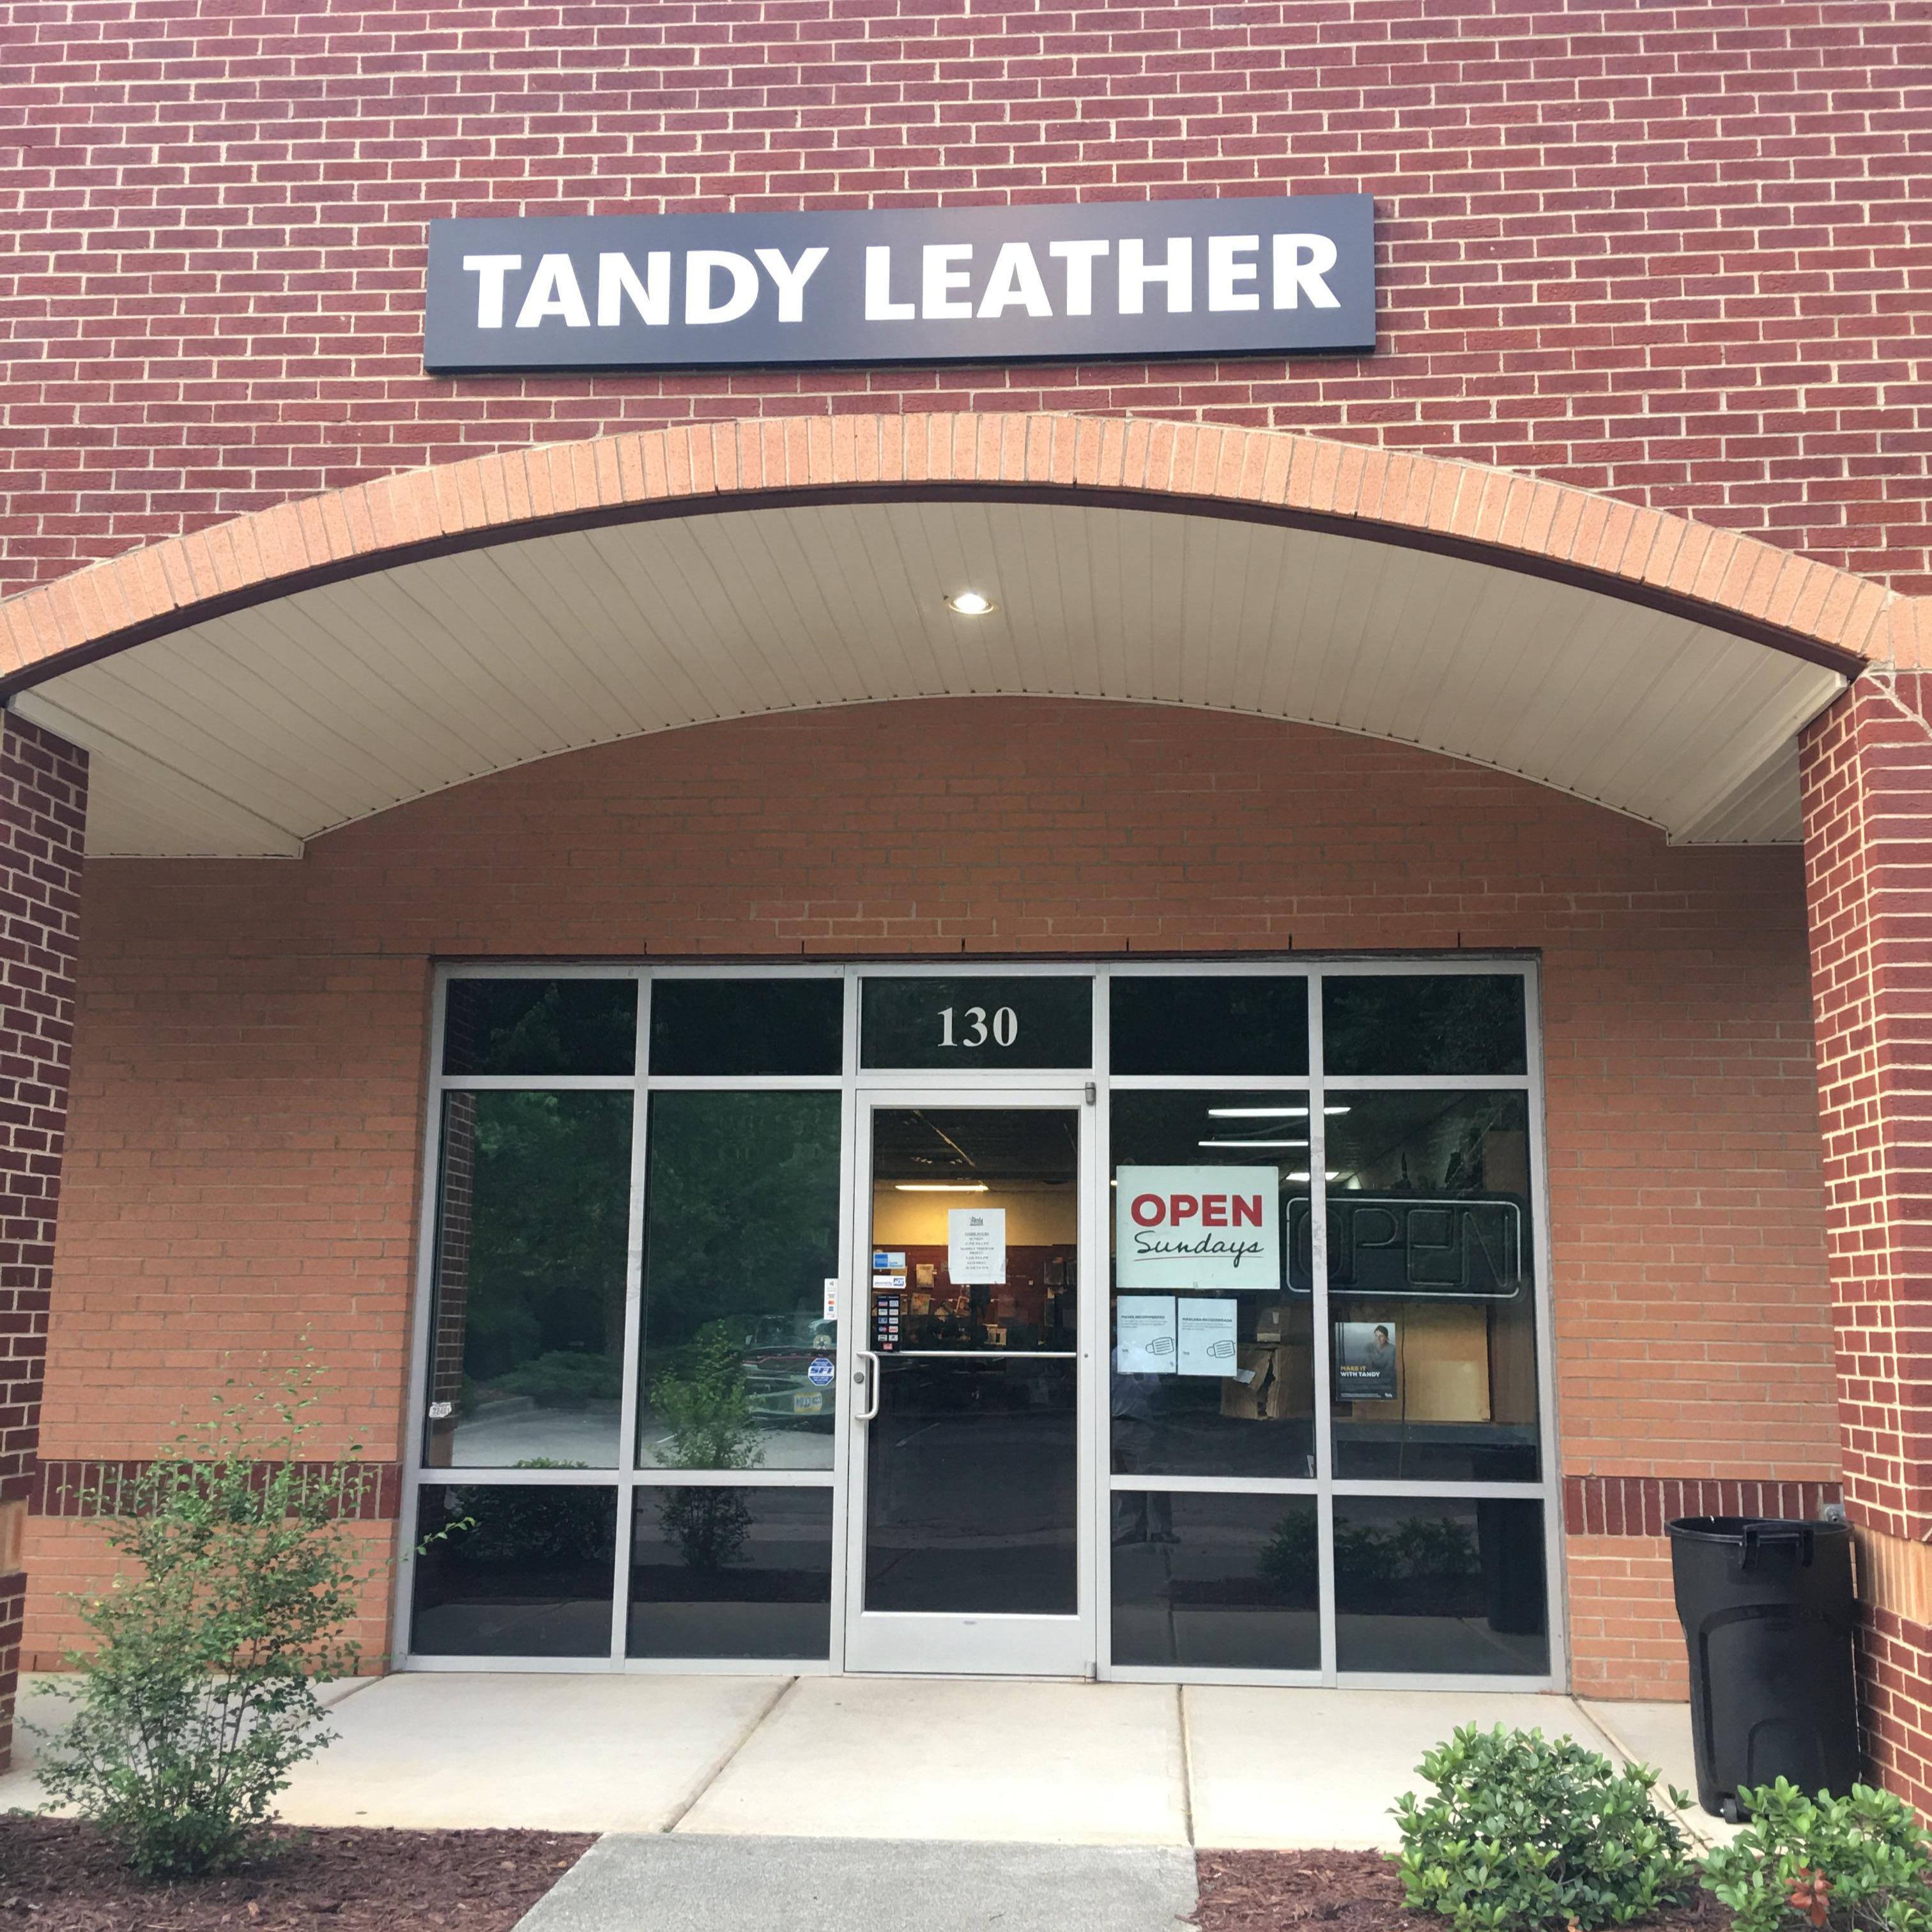 Have any of you tried the Tandy Leather Sneaker kit? If so, could